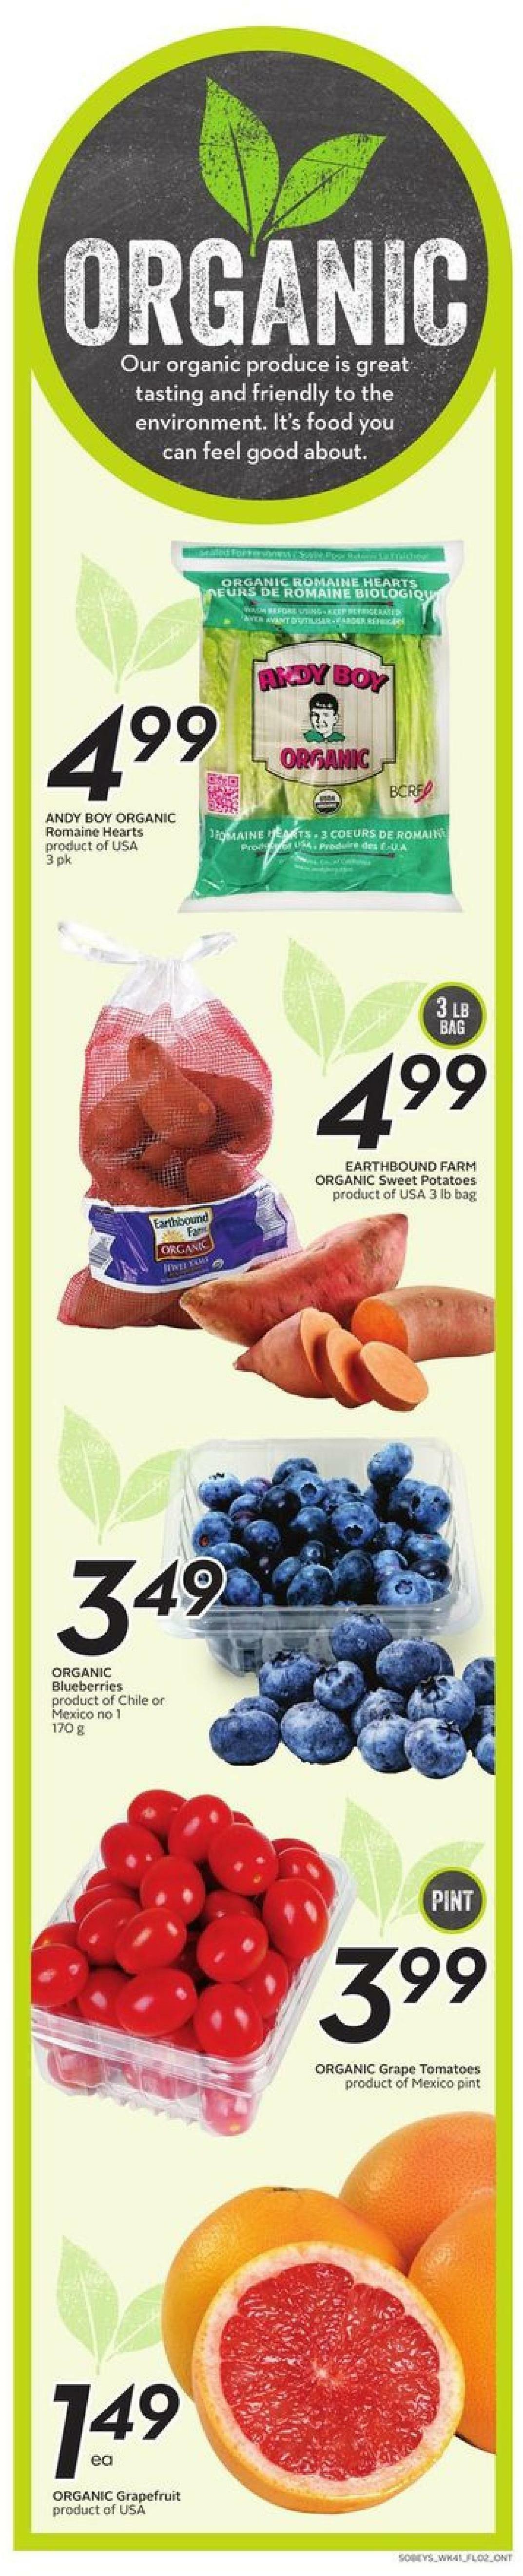 Sobeys Flyer from February 4